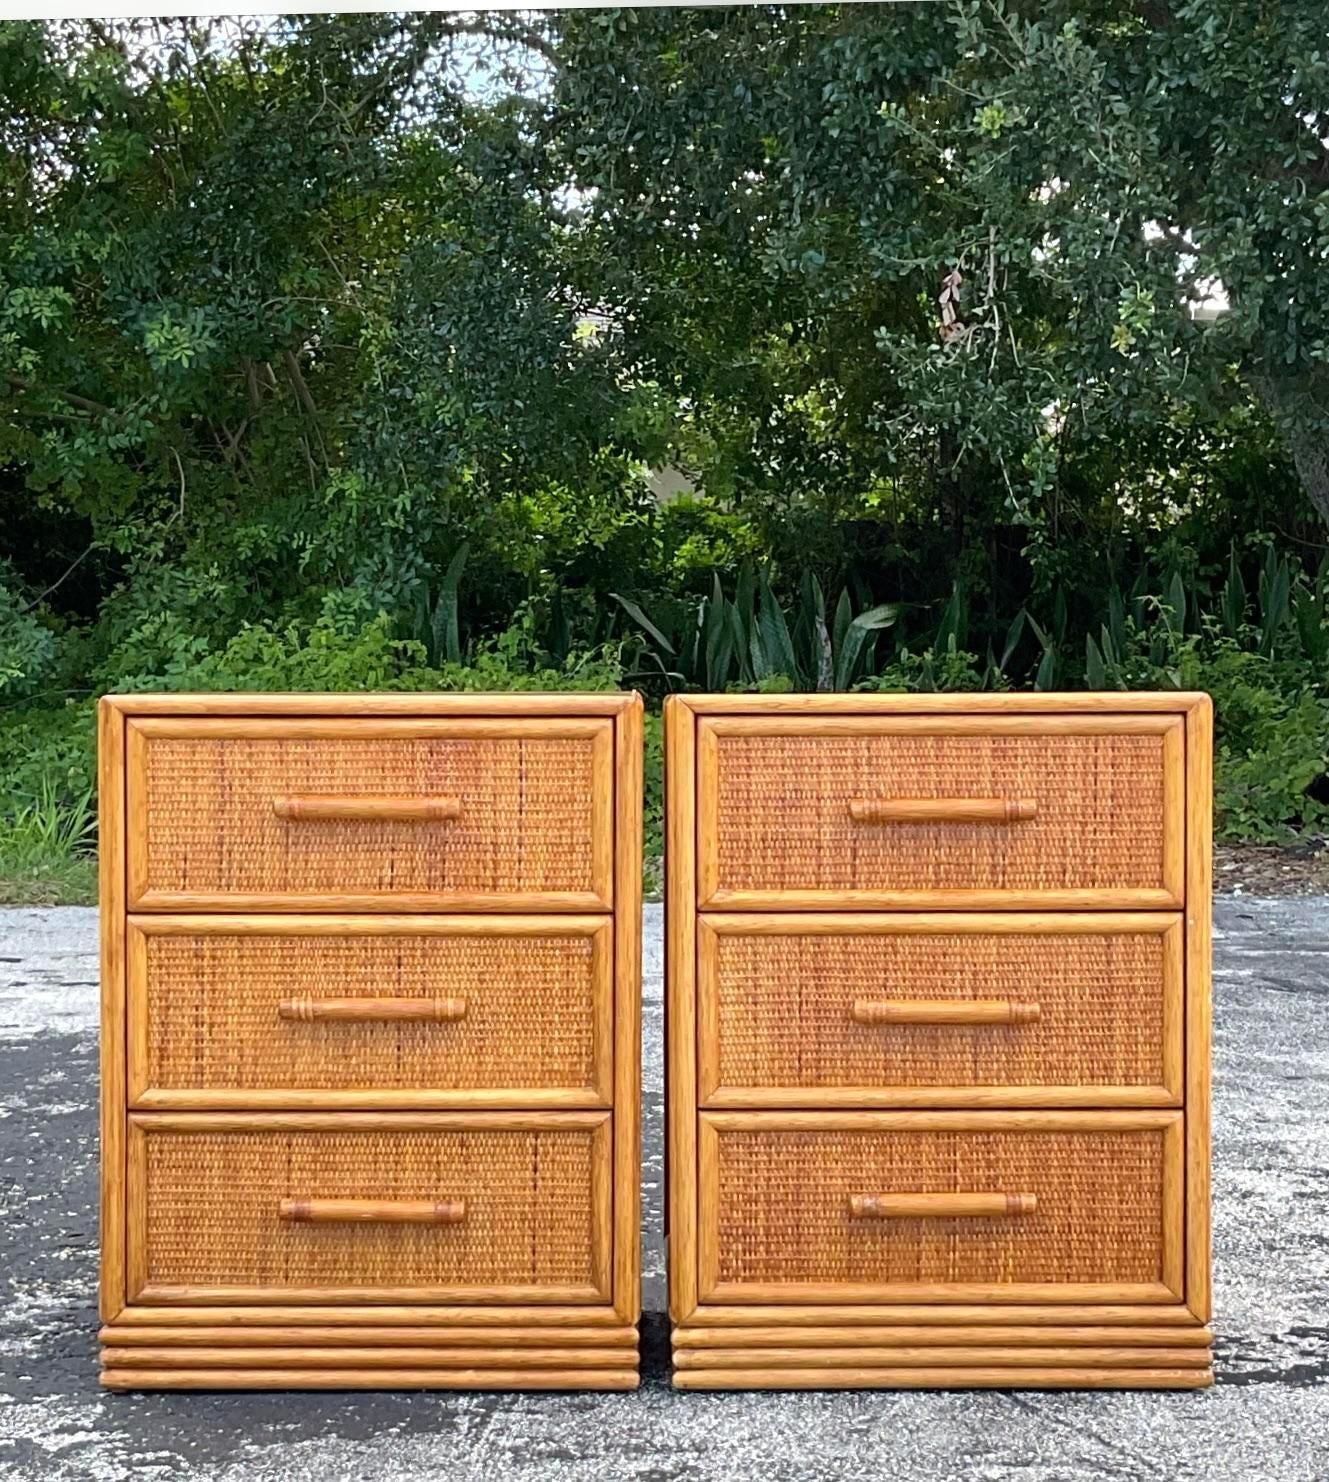 A fabulous pair of vintage Coastal nightstands. Chic rattan frame with woven rattan drawer fronts. A laminate top makes them extra durable. Greta looking and functional! Acquired from a Palm Beach estate.